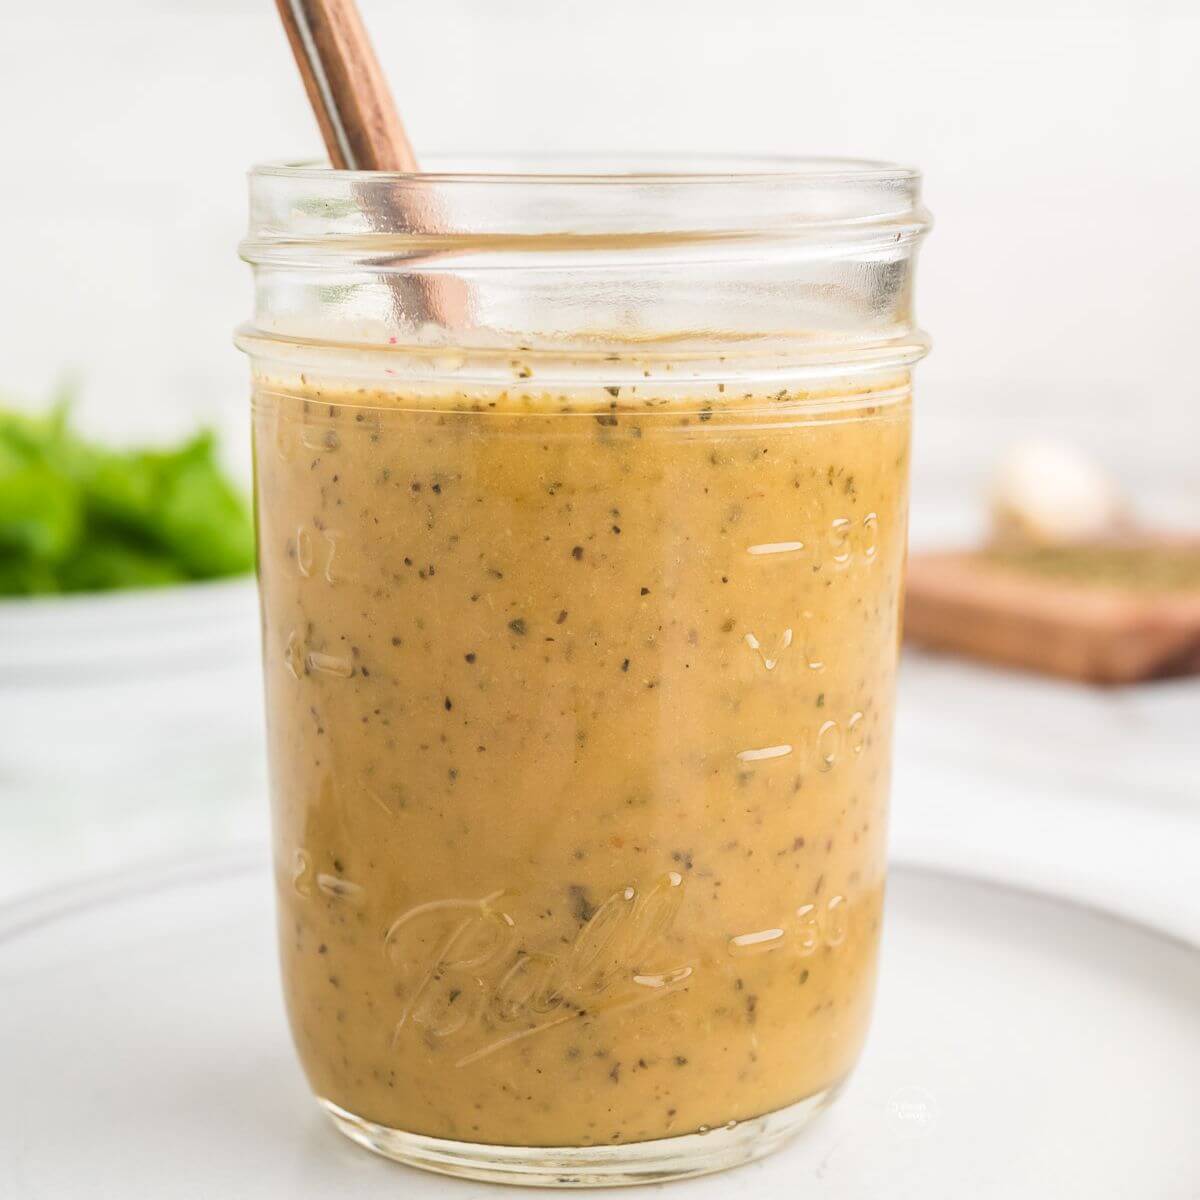 A jar filled with homemade zesty Italian dressing recipe with spoon.